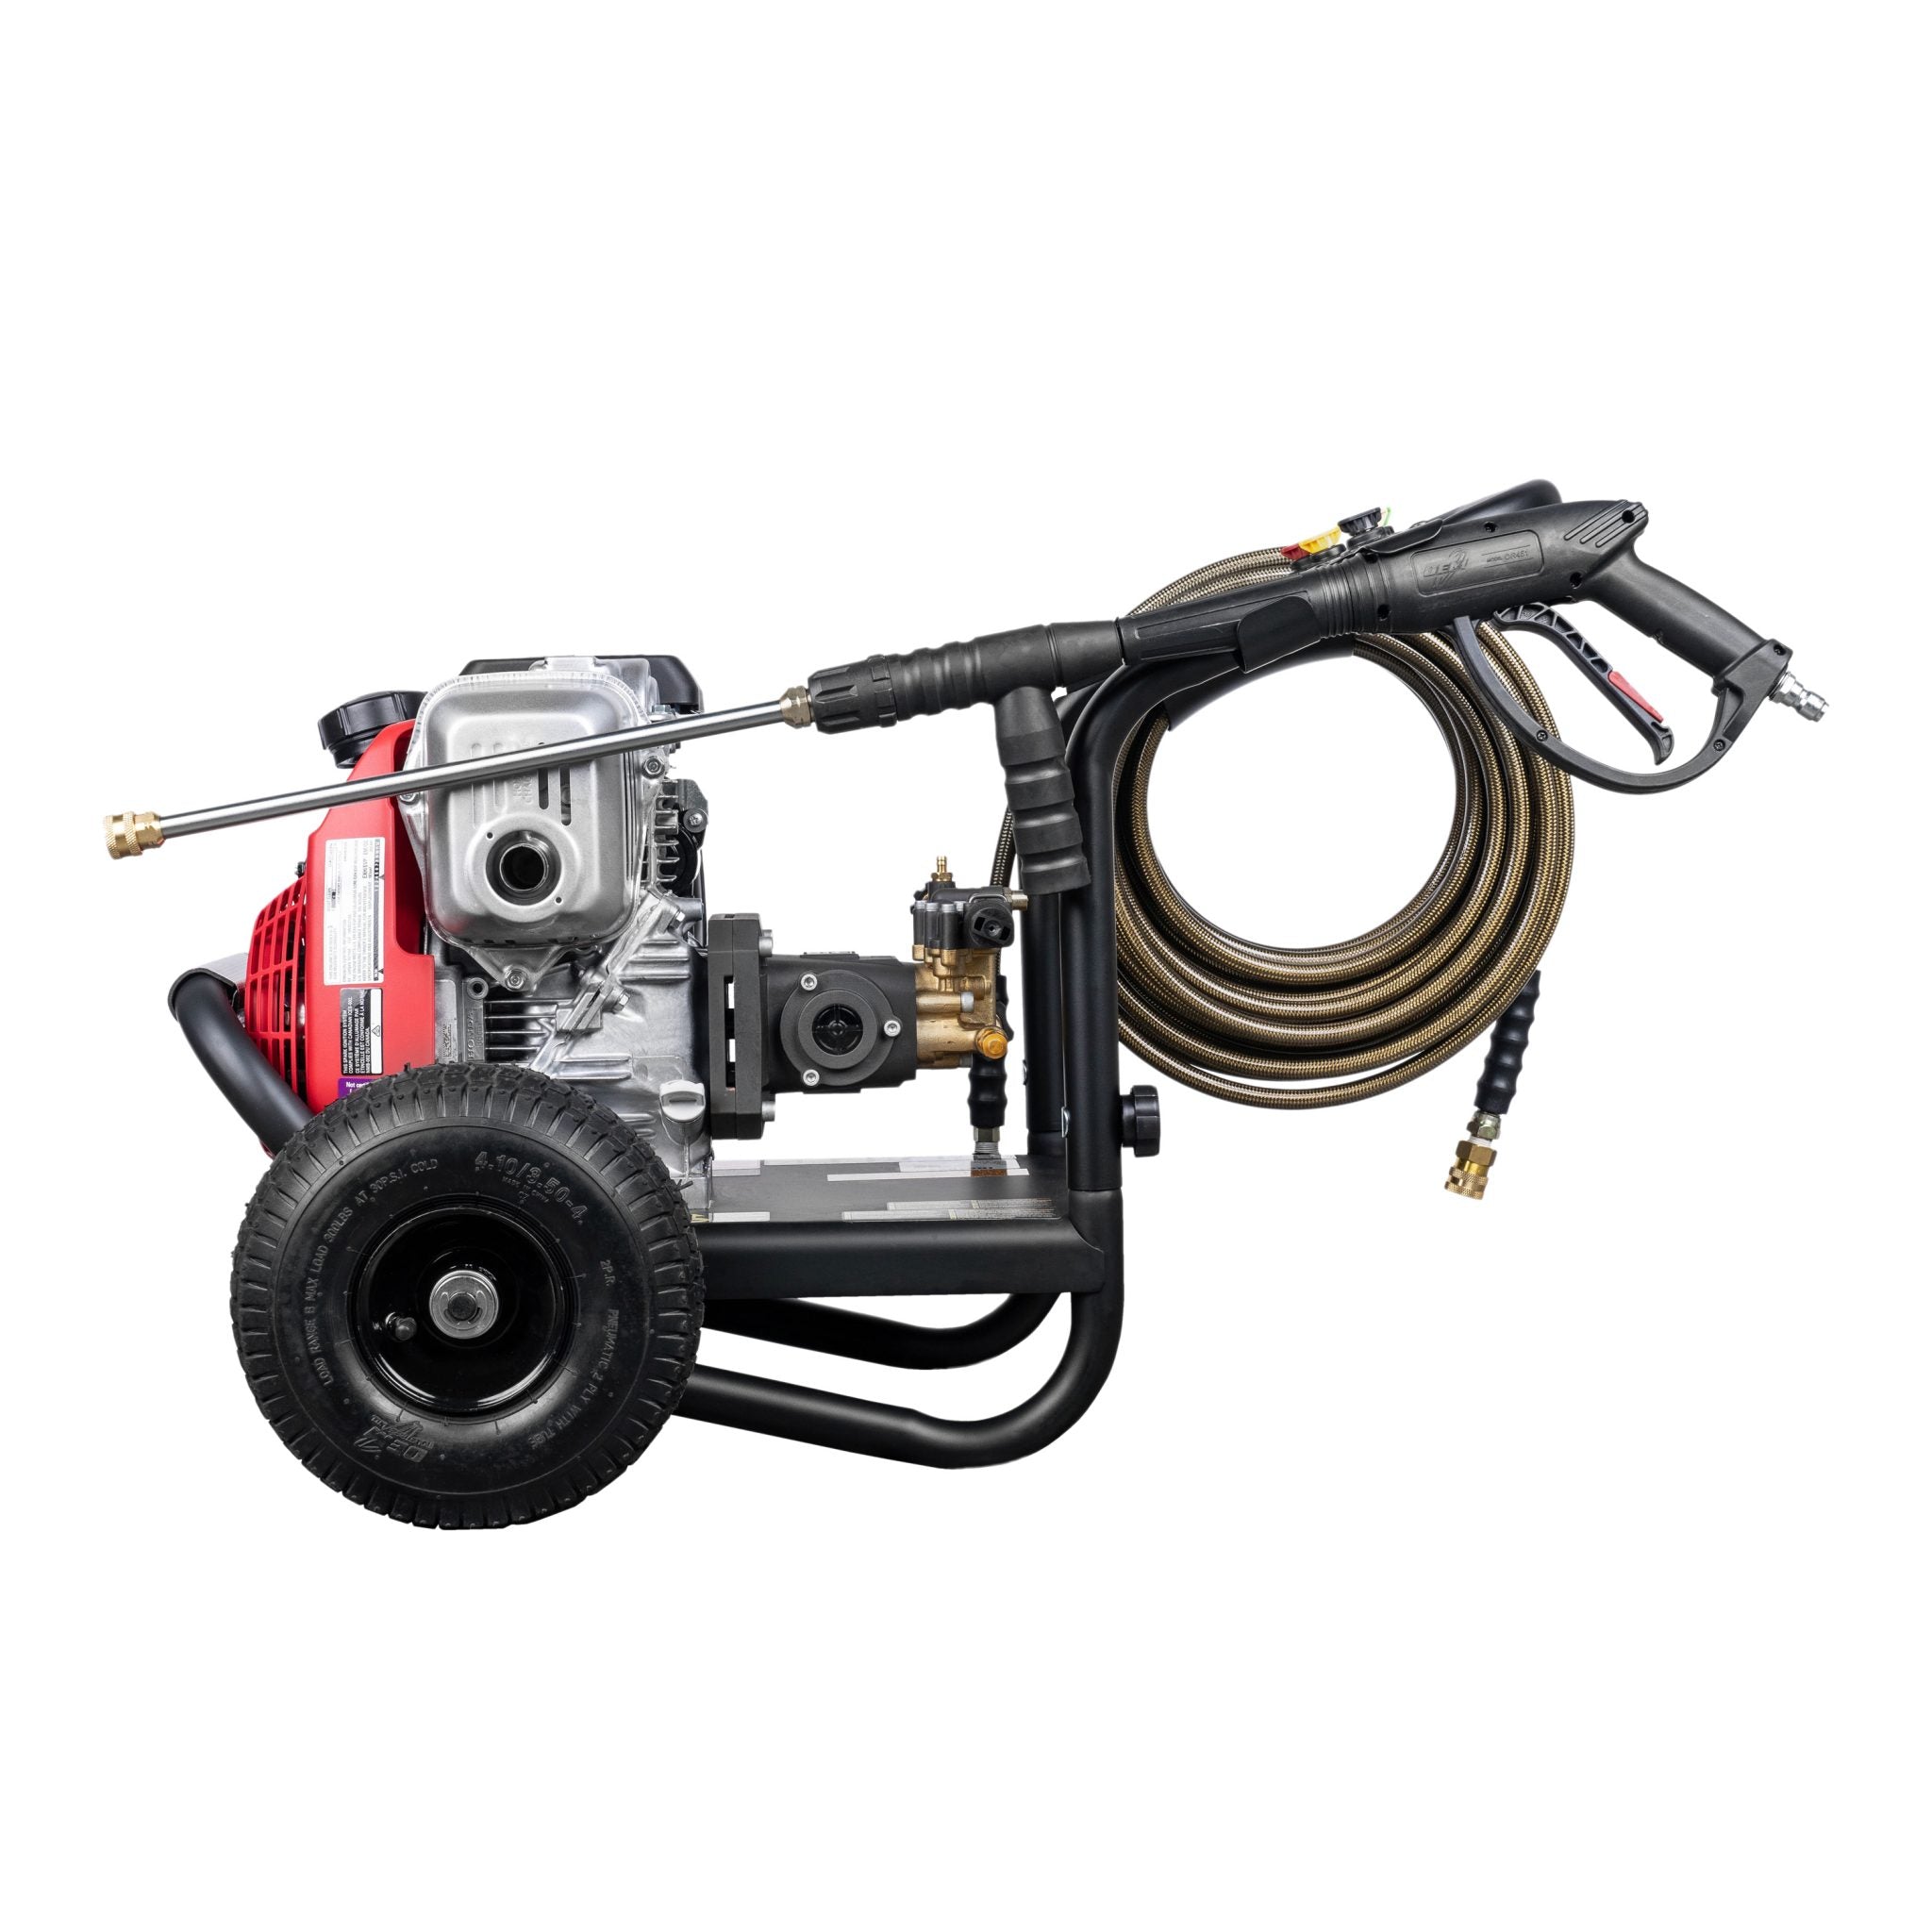 Simpson Industrial IS61023 2700-PSI Gas Pressure Washer with Honda GC190 Engine